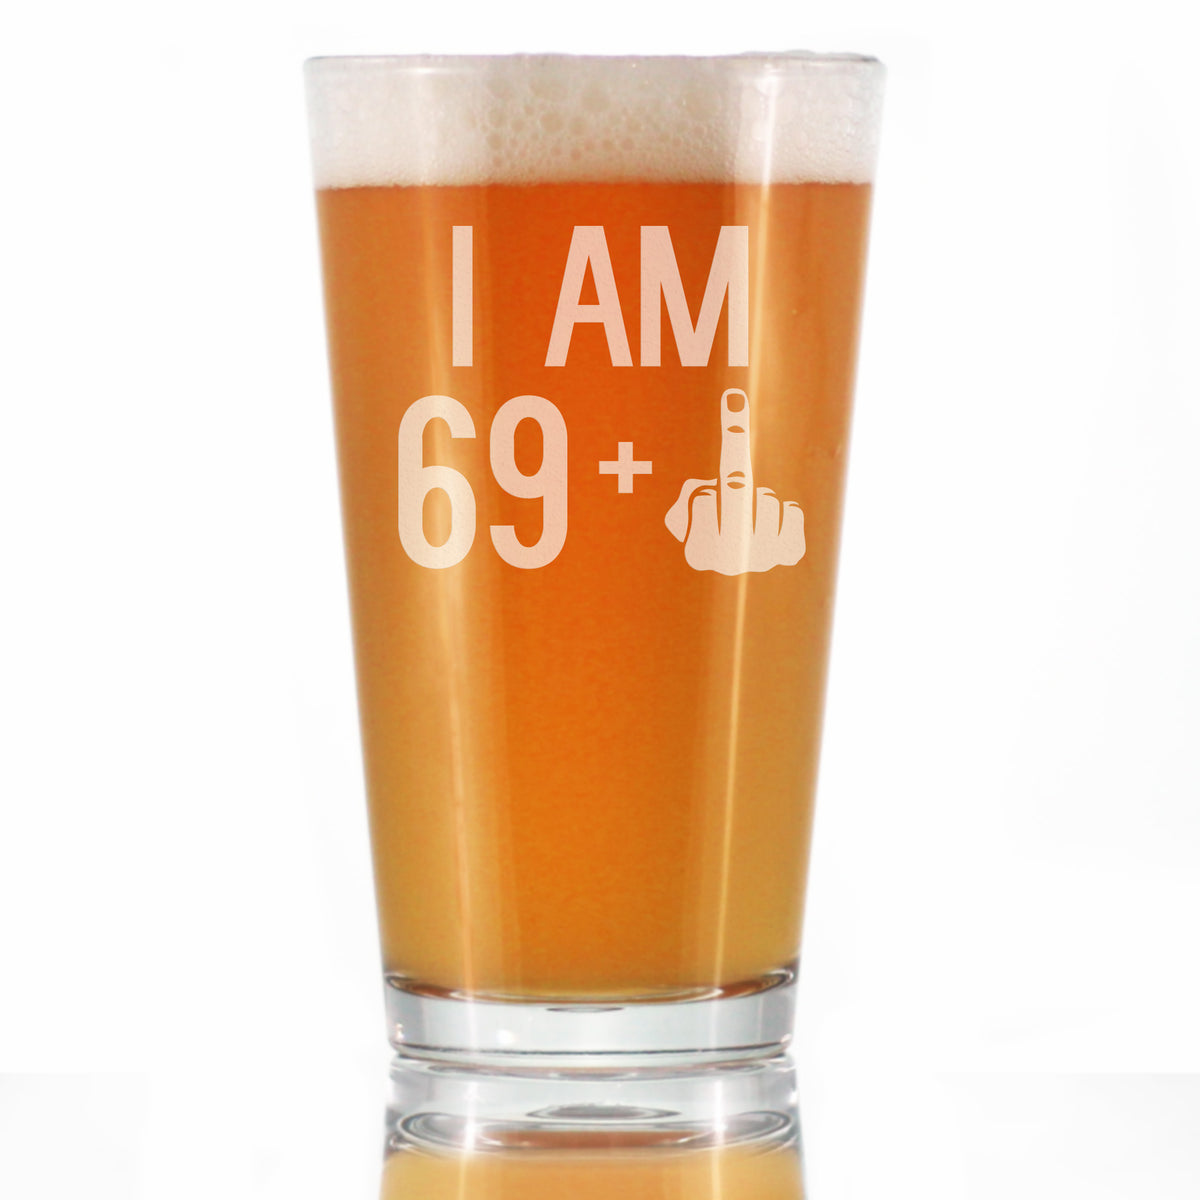 69 + 1 Middle Finger - 16 oz Pint Glass for Beer - Funny 70th Birthday Gifts for Men Turning 70